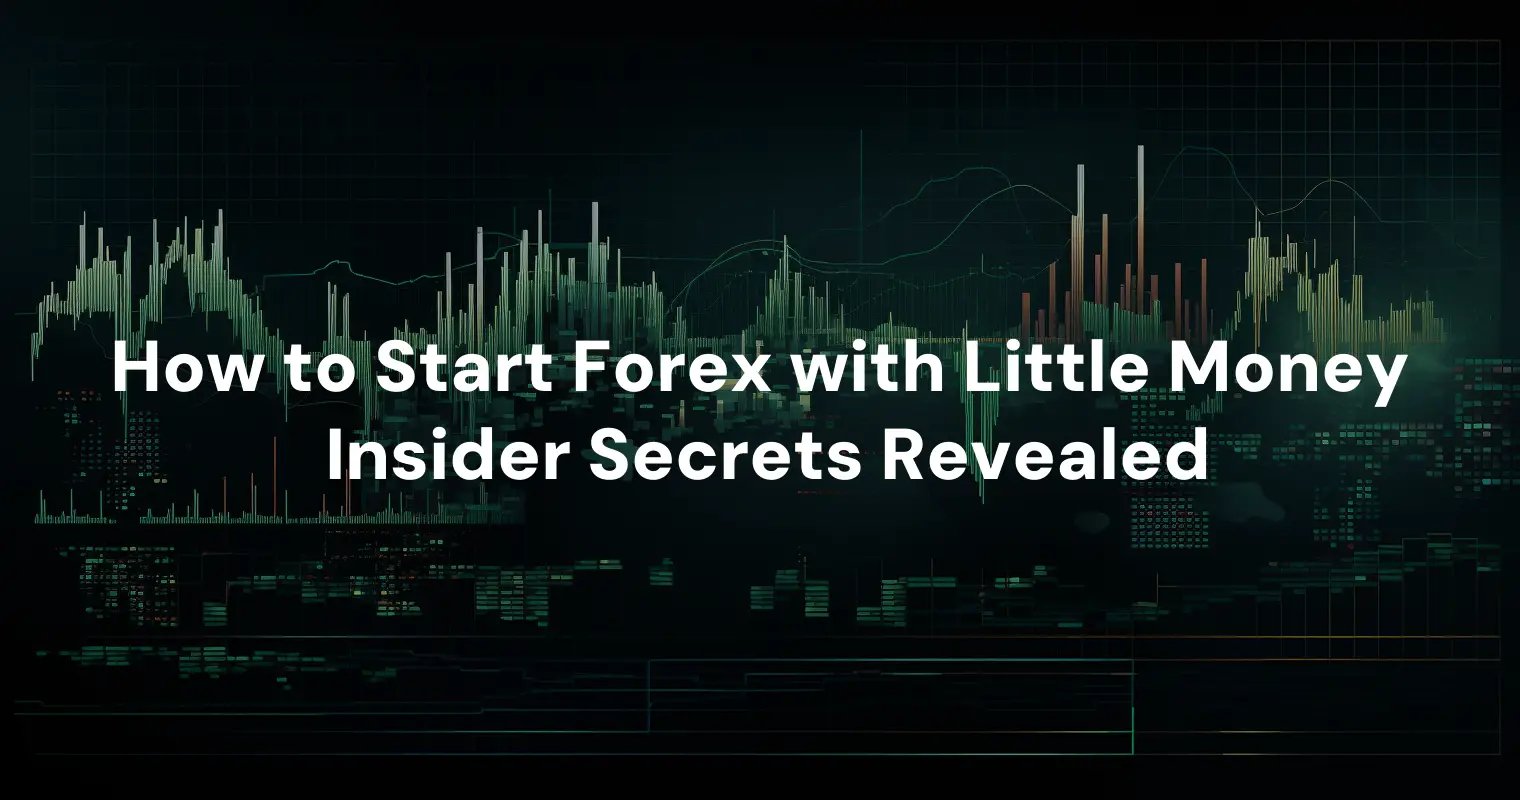 How to Start Forex with Little Money: Insider Secrets Revealed